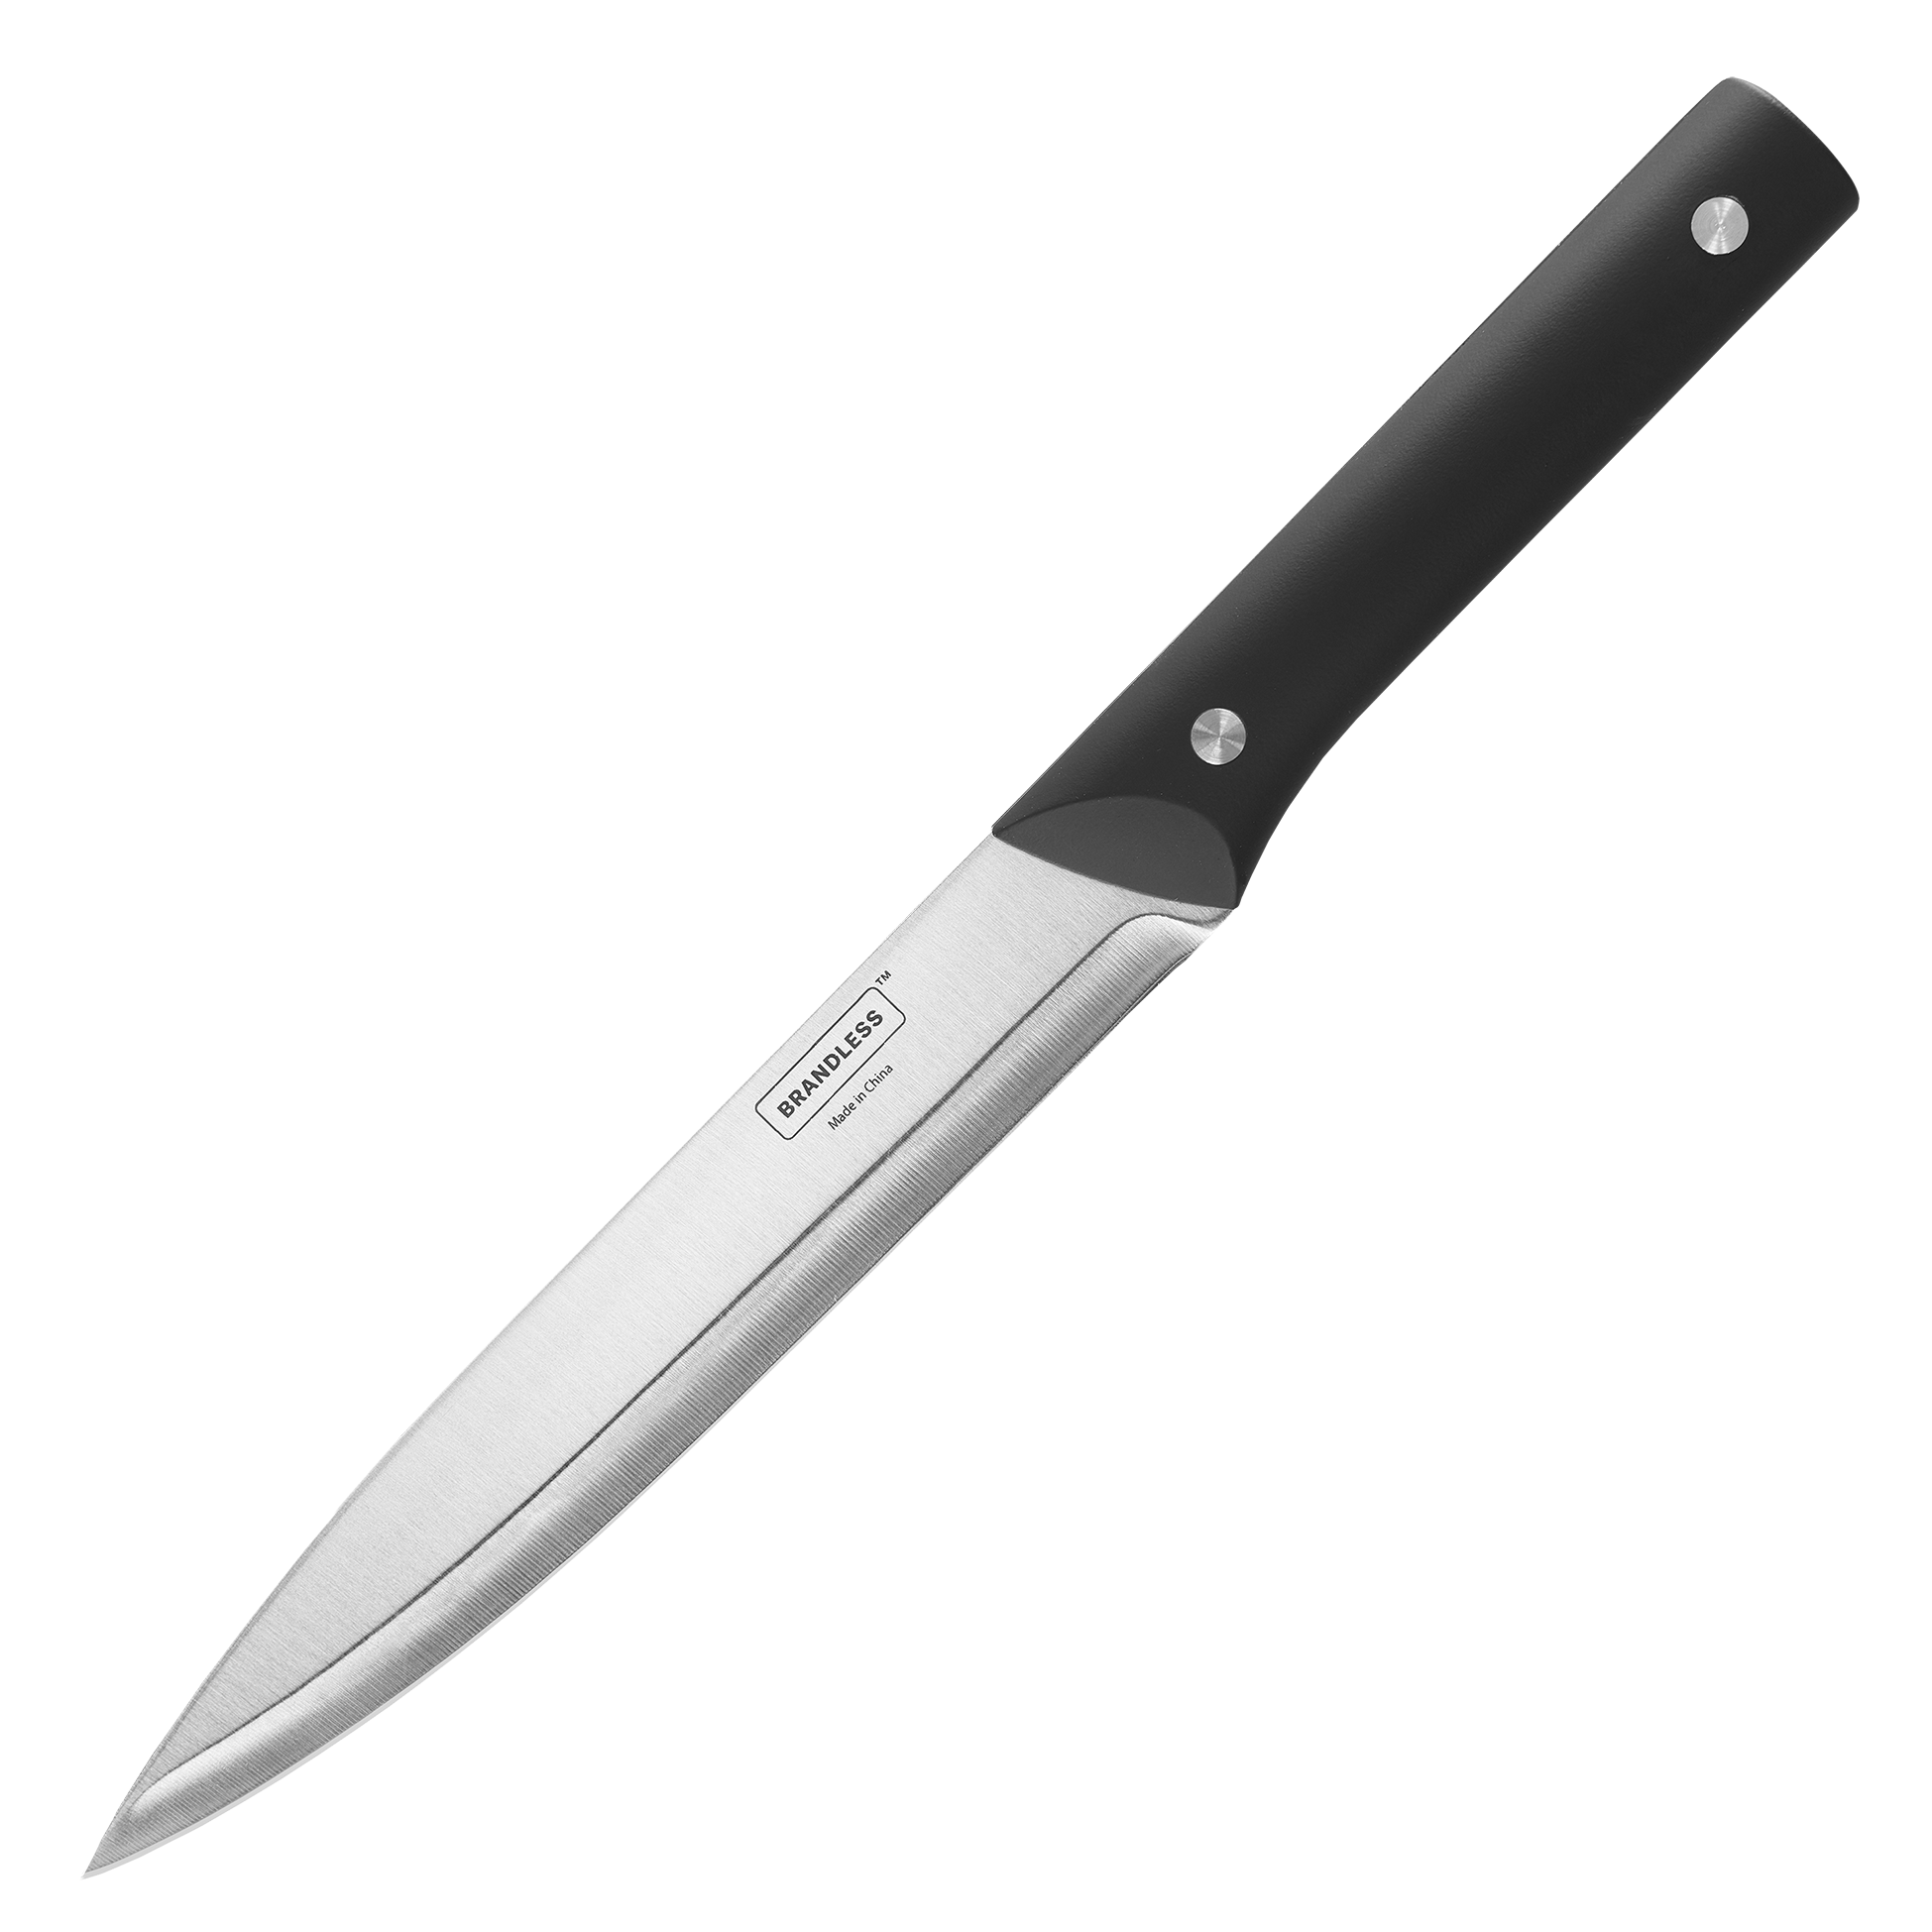 Product photo, carving knife with riveted handle.